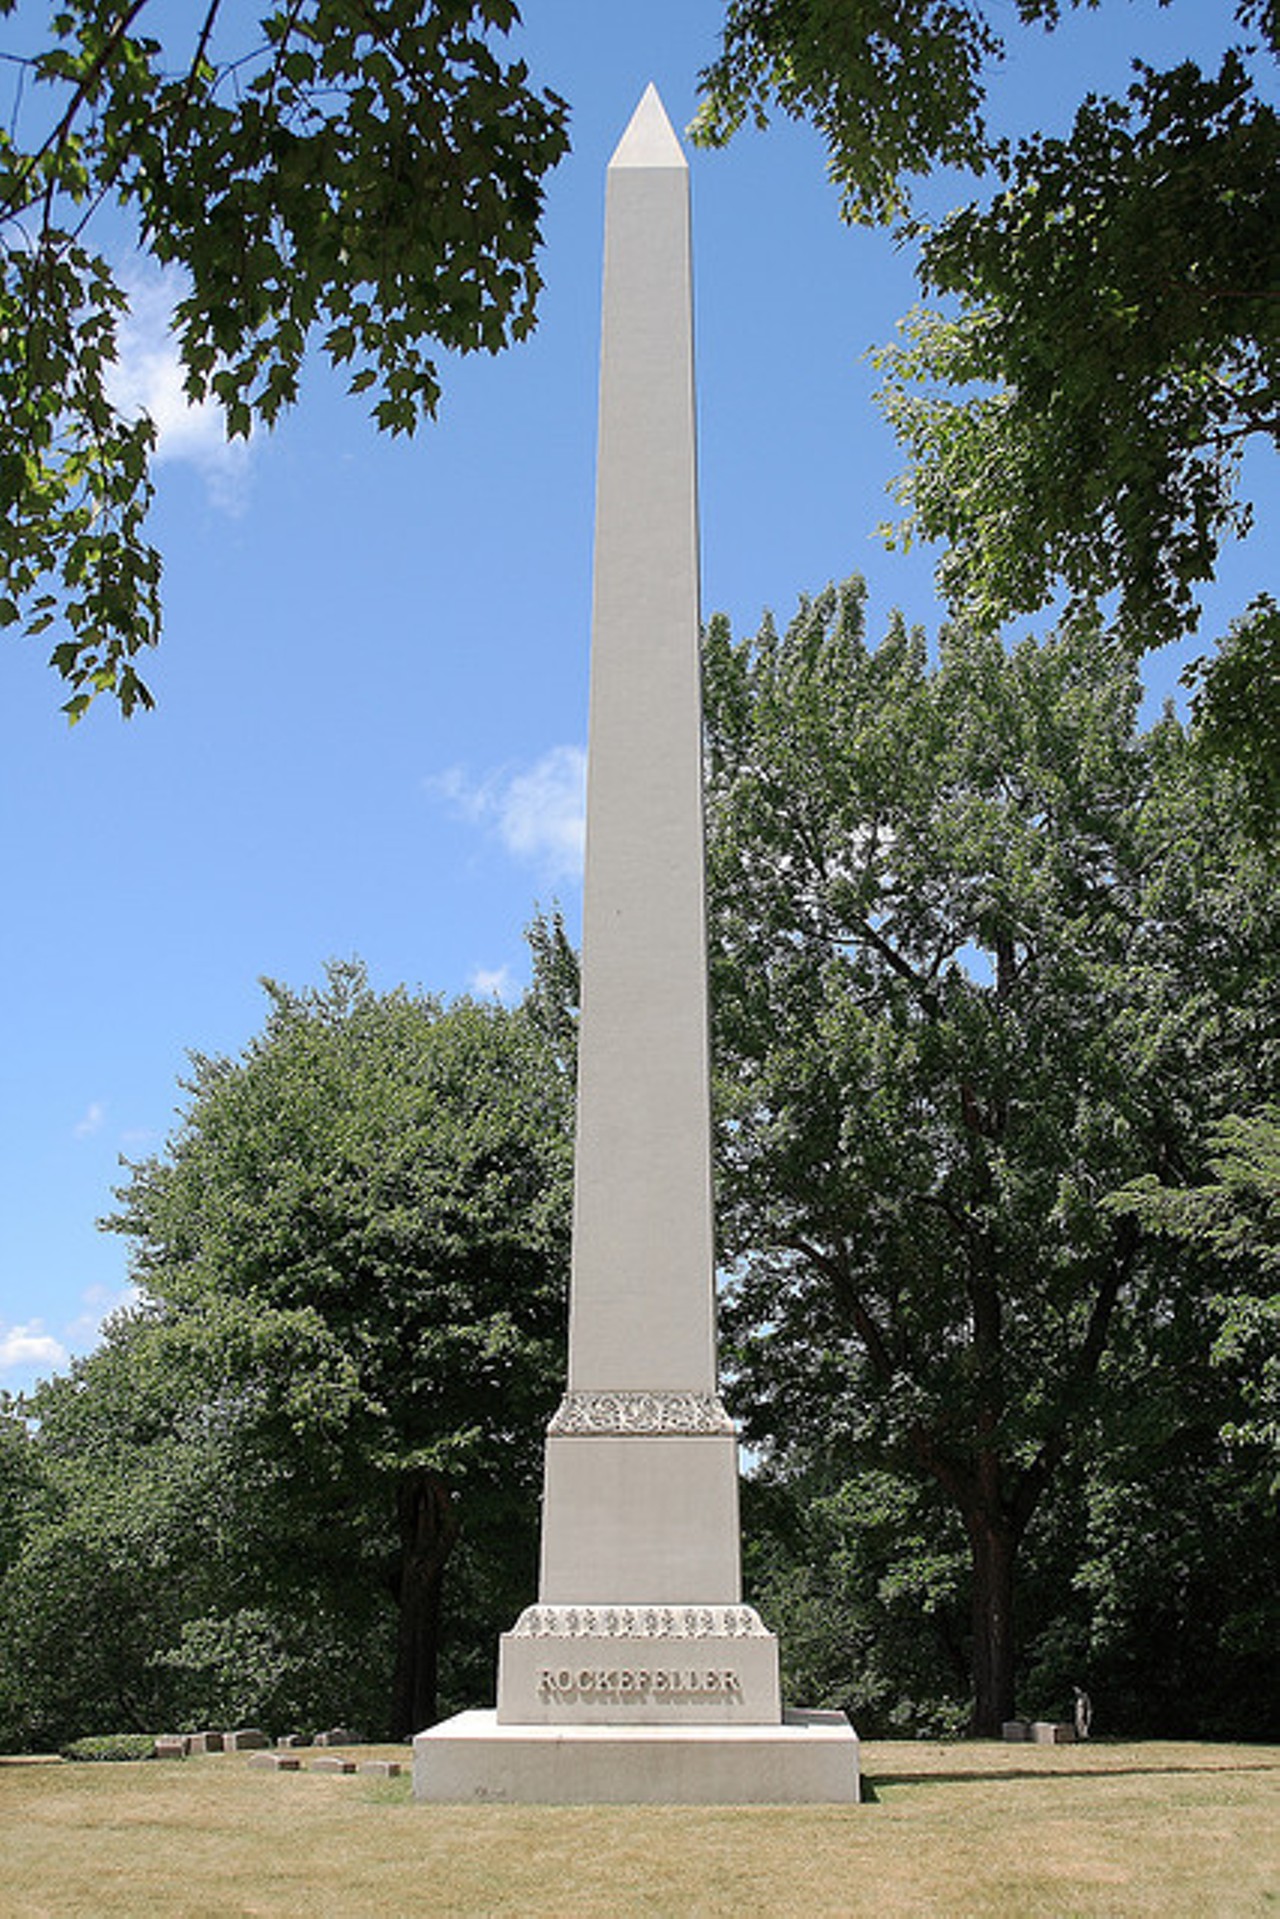 Lakeview Cemetery: Basically THE Captain of Industry back in the booming age of oil and machinery. He started Standard Oil and became a tycoon and philanthropist; gravestone eerily reminiscent of Washington Monument.